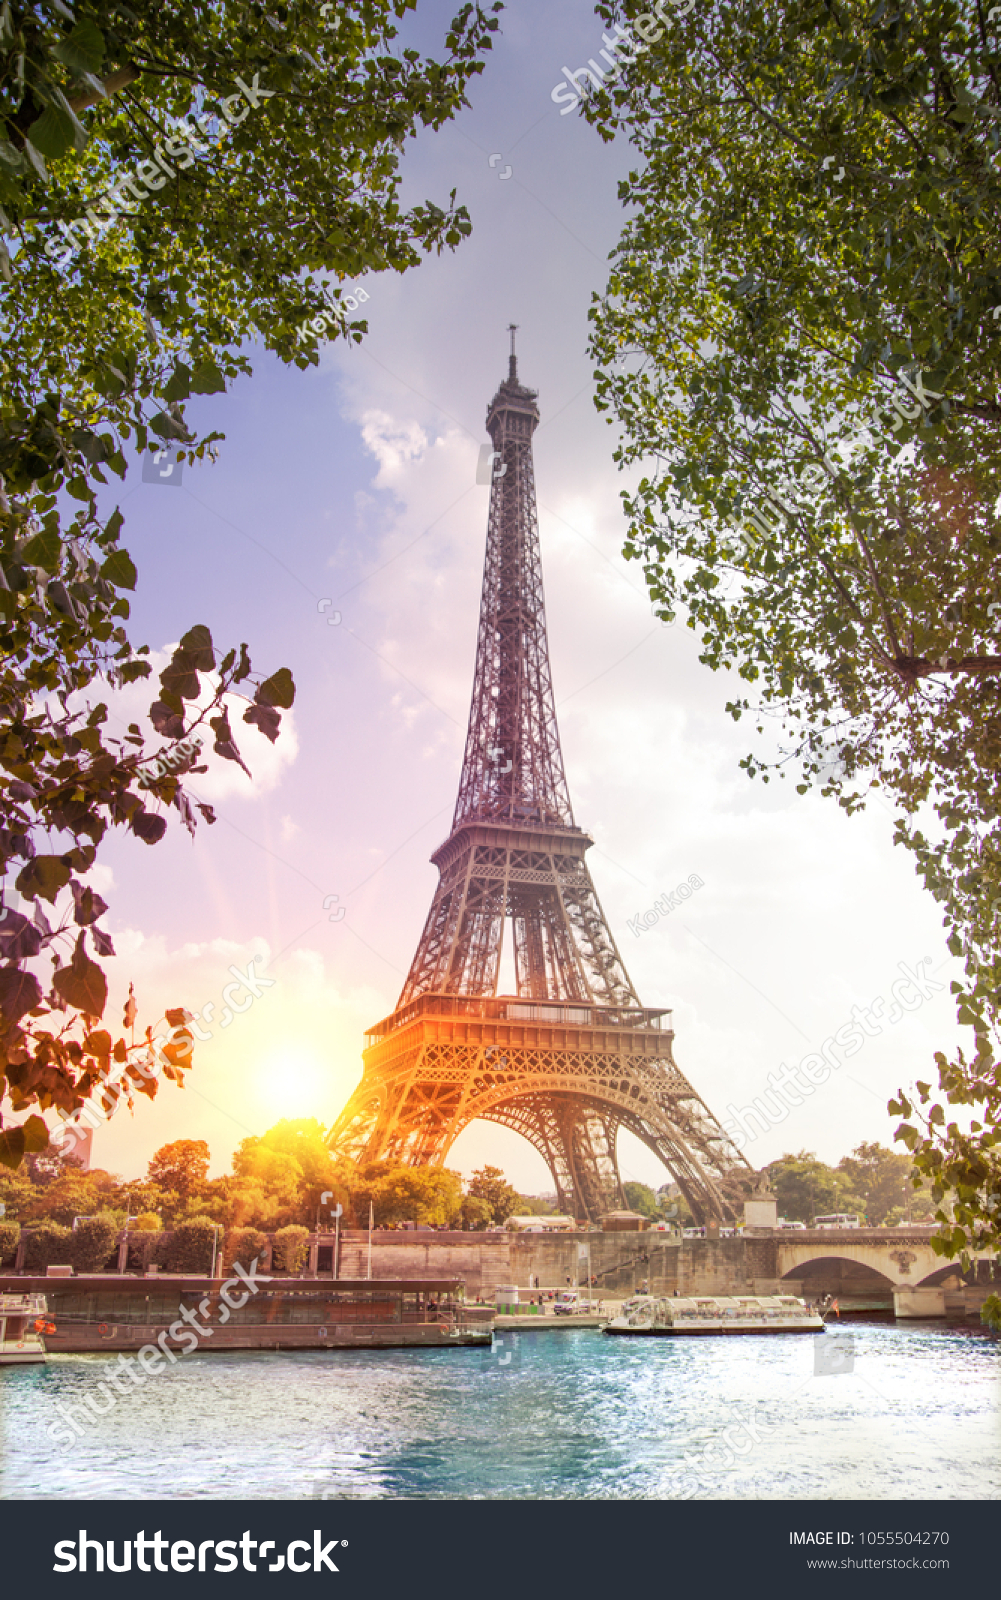 Romantic sunset background. Eiffel Tower with boats on Seine river in Paris, France. #1055504270